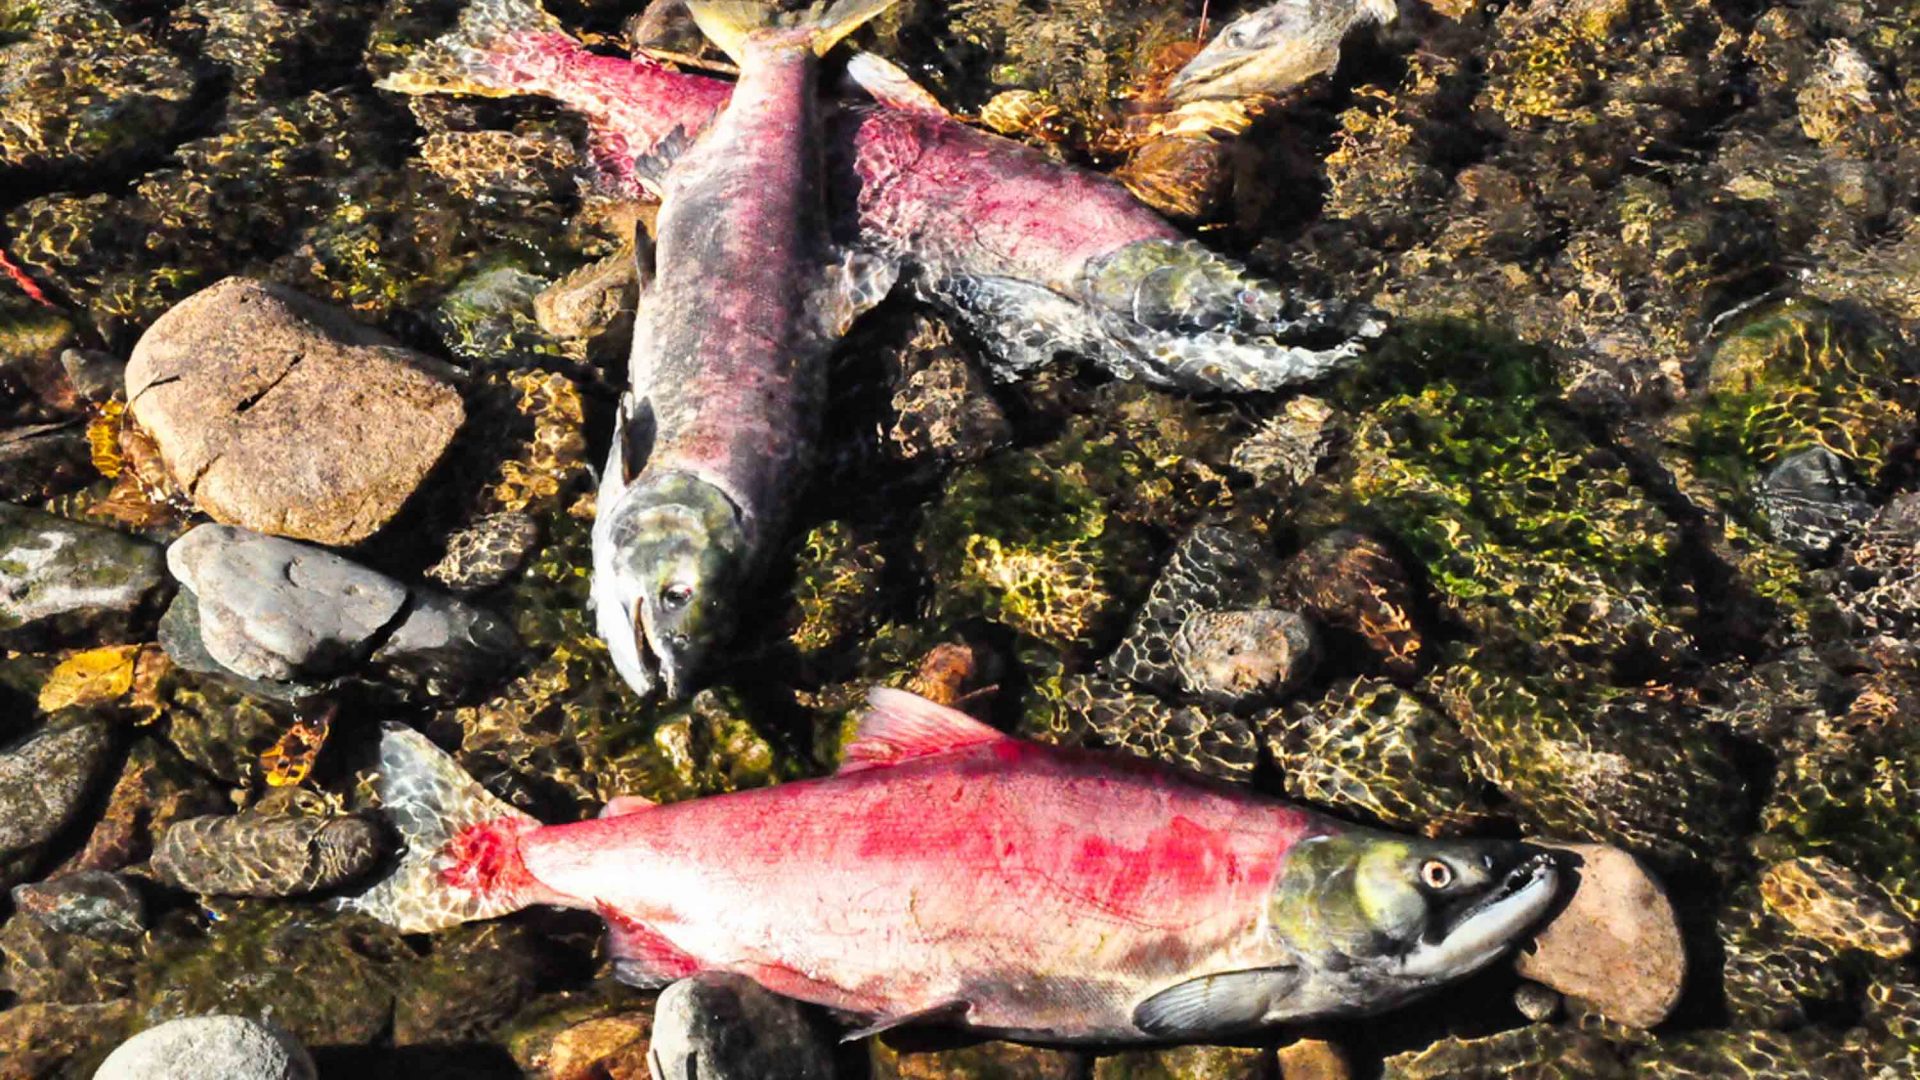 Sockeye salmon that didn't make the distance found in the Adams River.